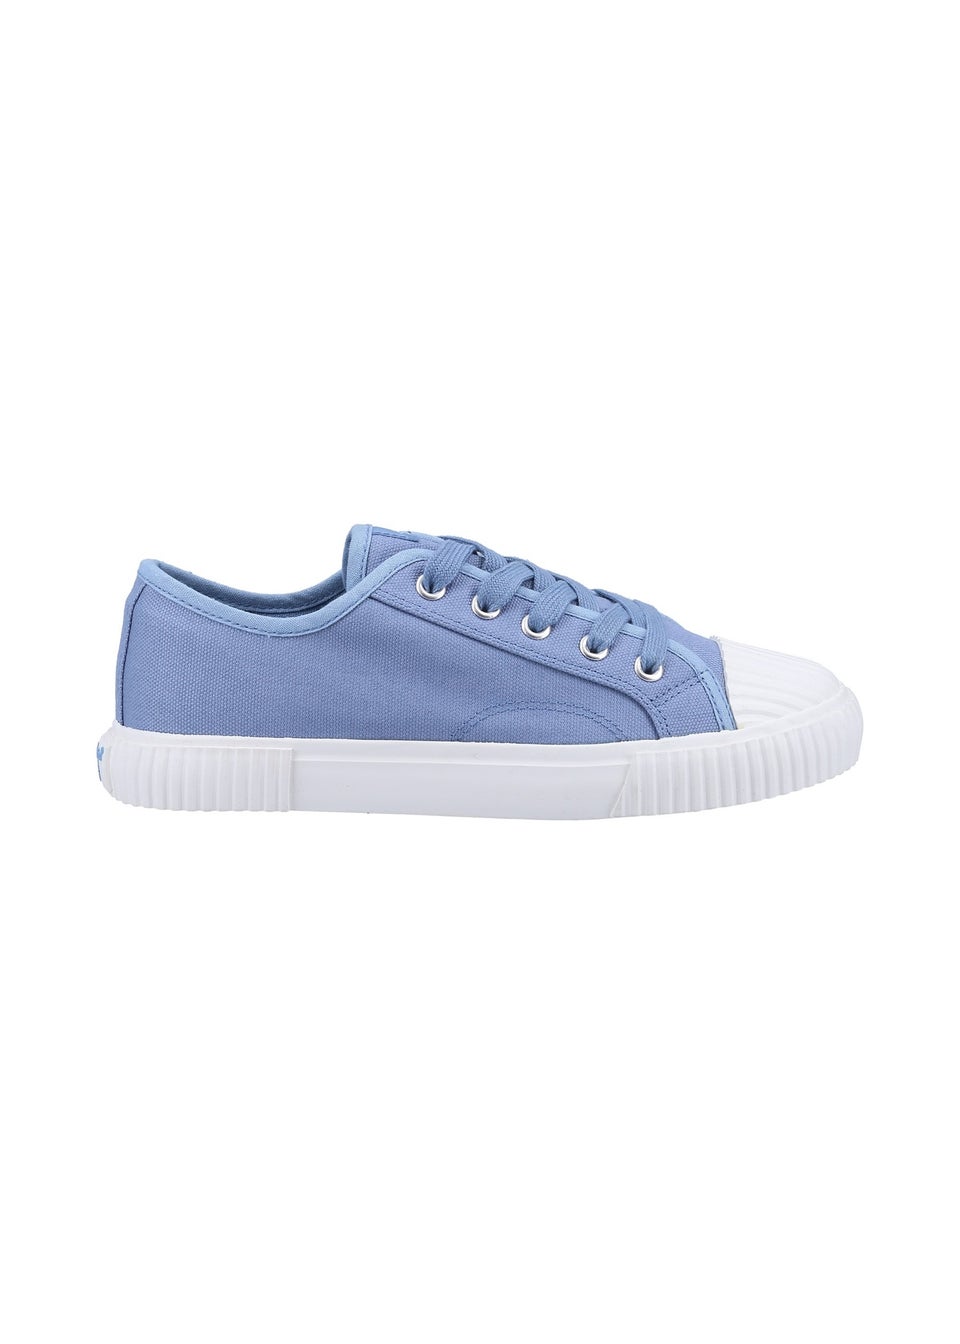 Hush Puppies Blue Brooke Canvas Trainer